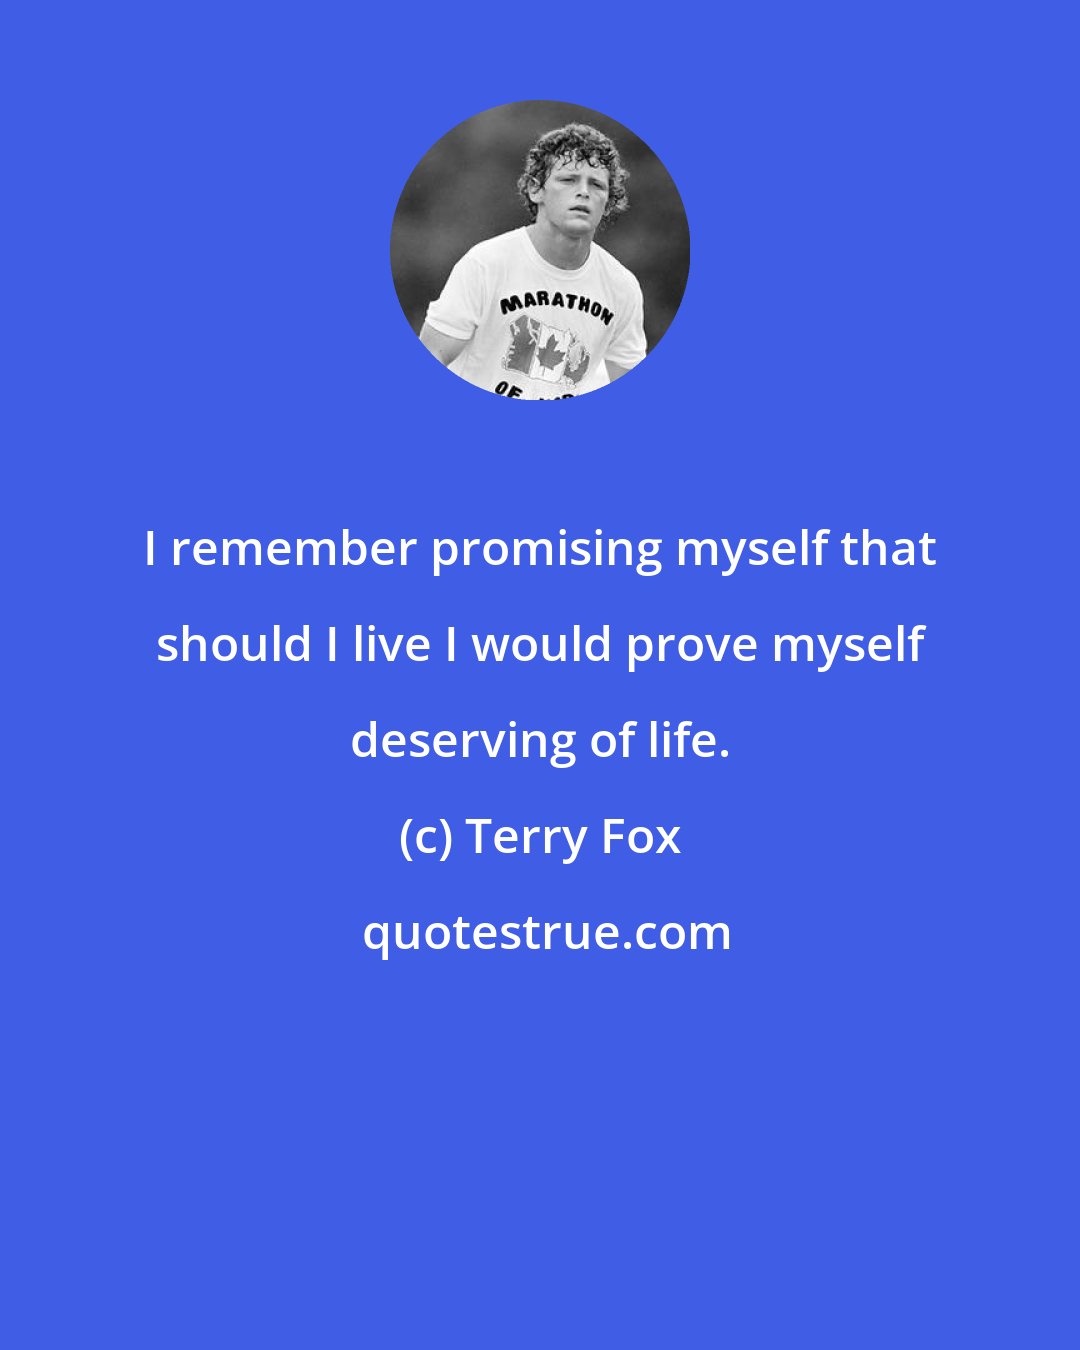 Terry Fox: I remember promising myself that should I live I would prove myself deserving of life.